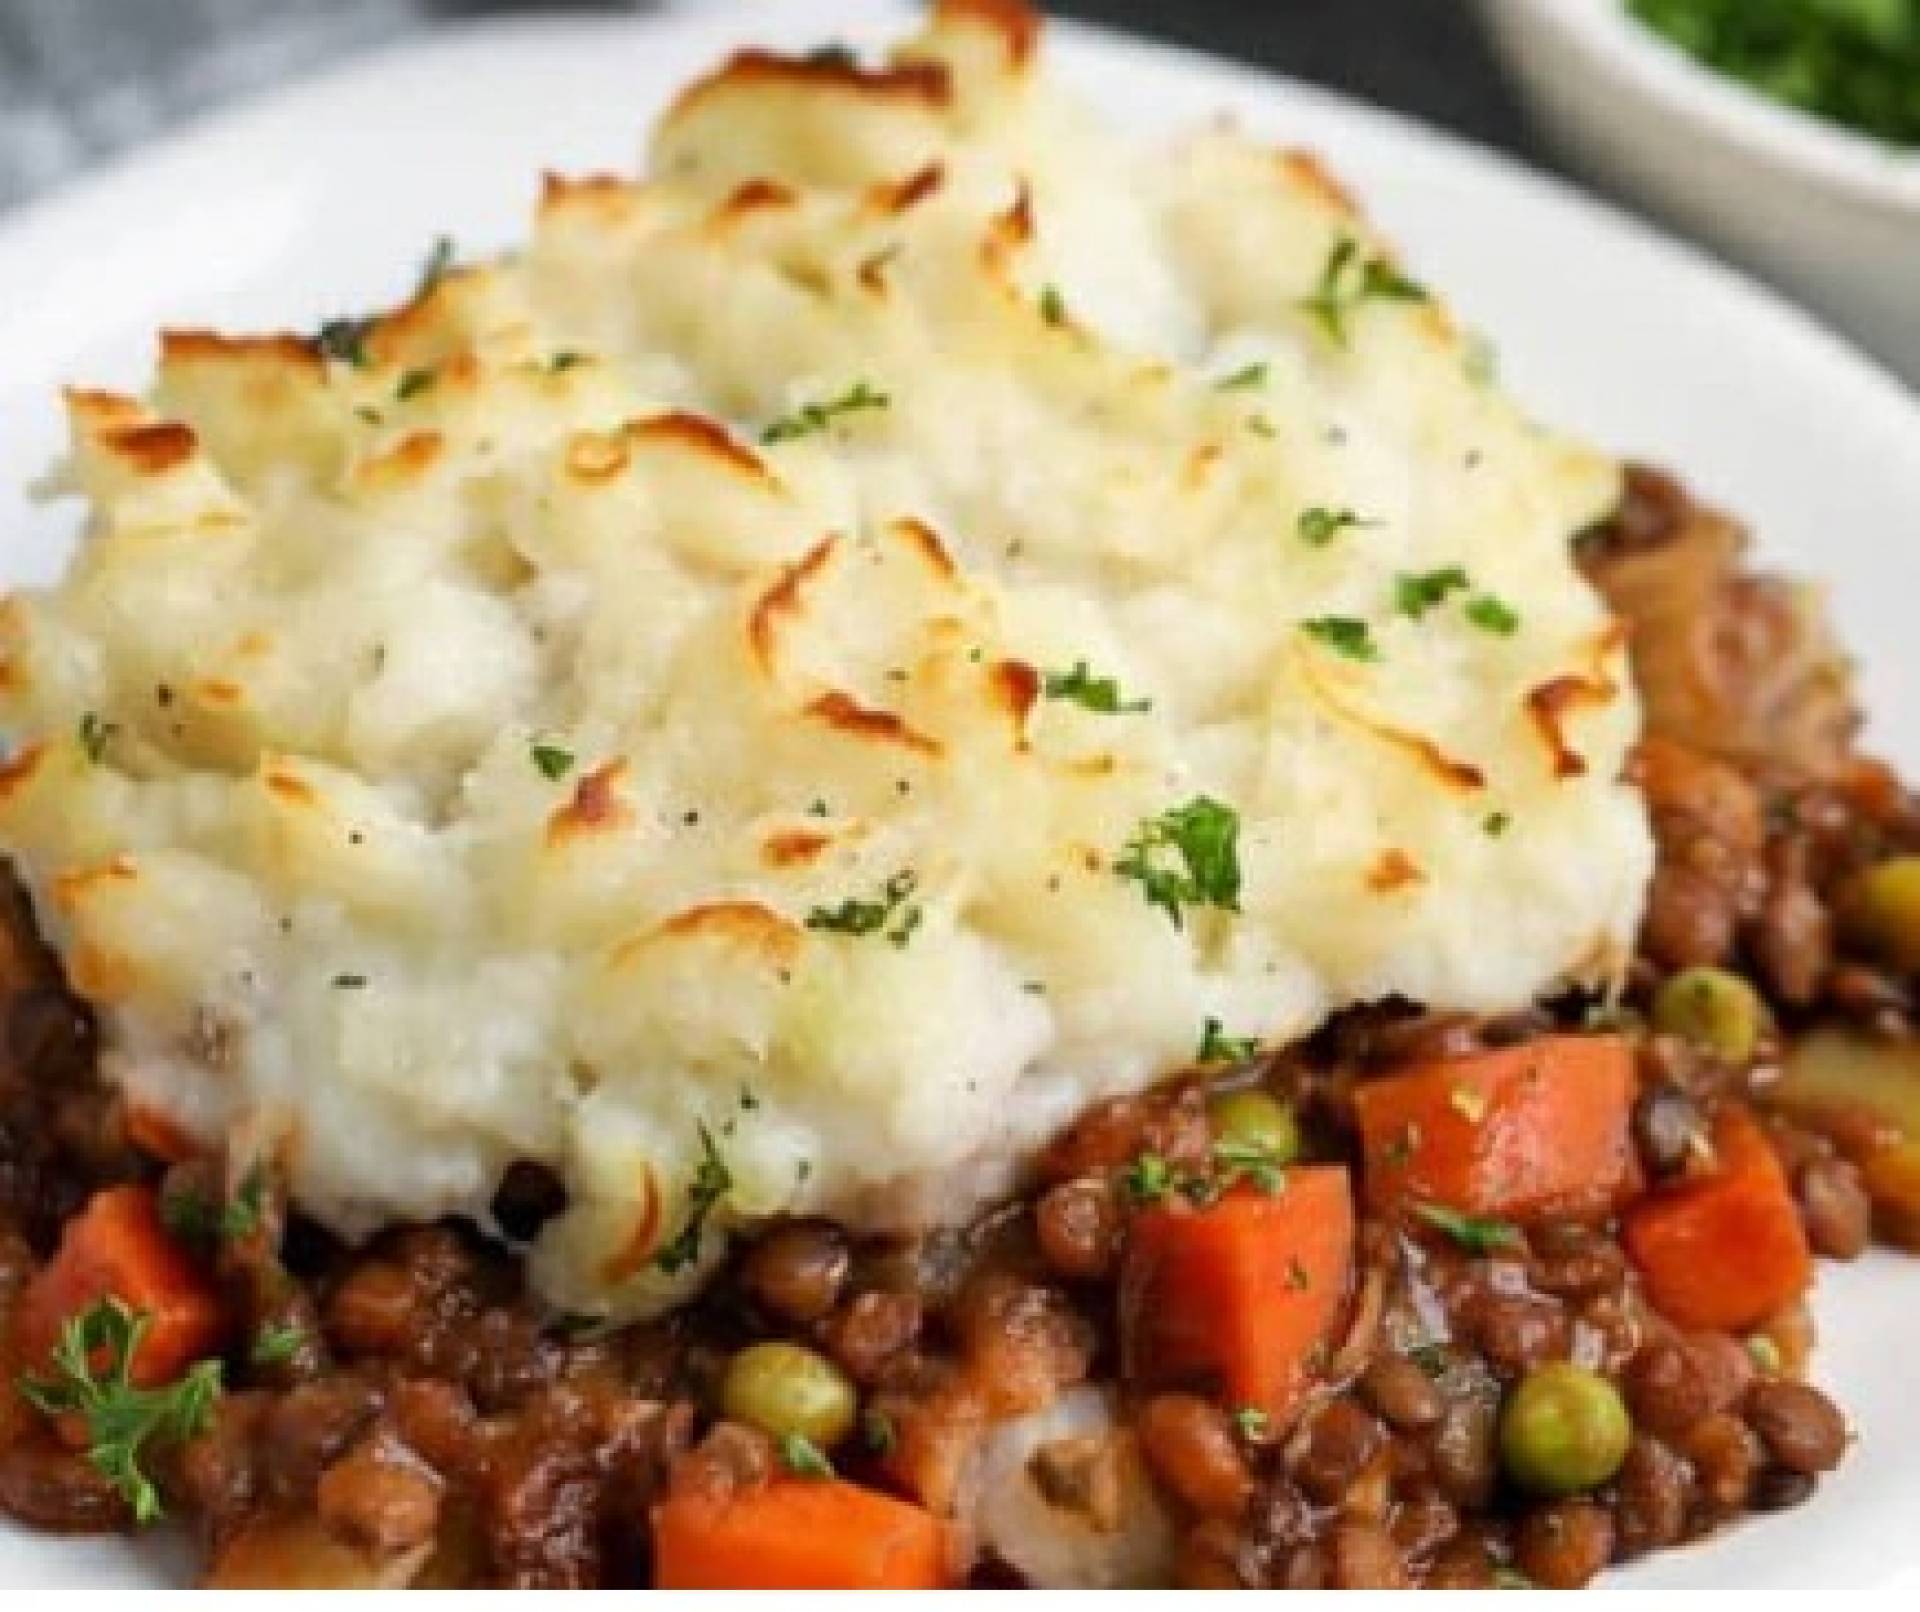 Shephards Pie with Local Ground Beef